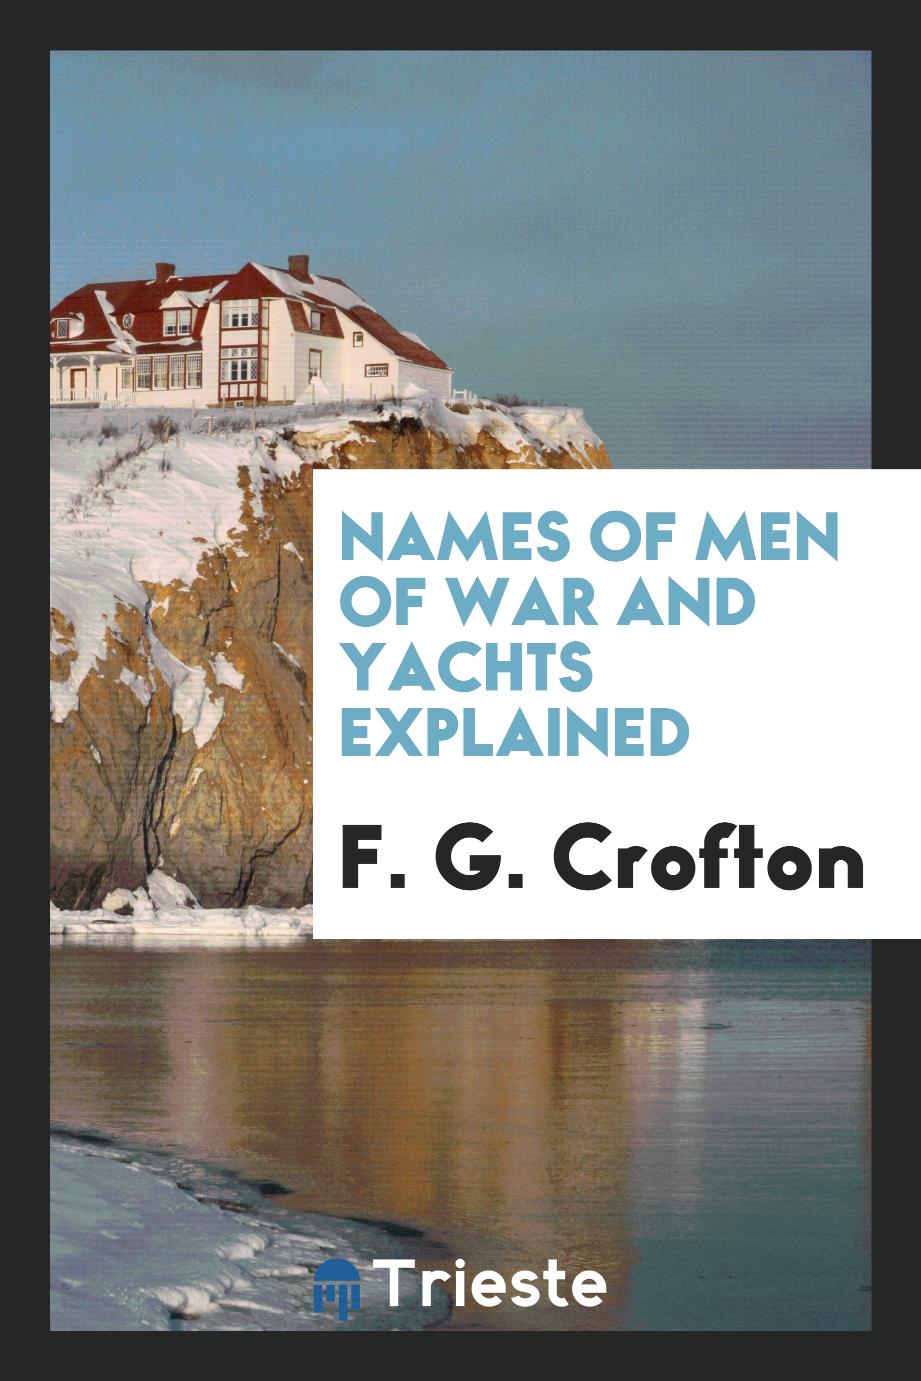 Names of Men of War and Yachts Explained